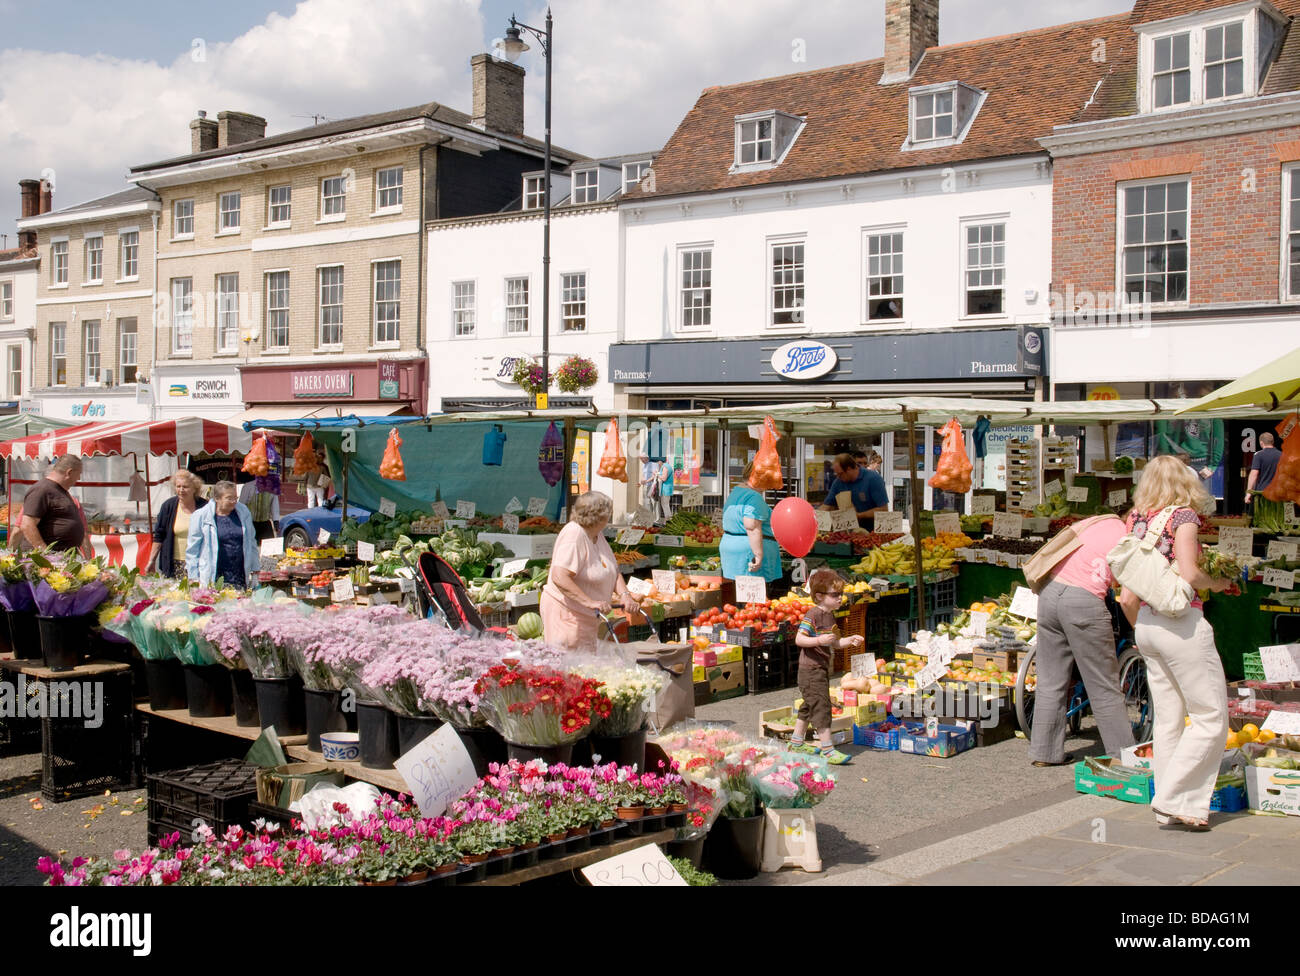 The twice-weekly market in Market Square, in the middle of Sudbury, Suffolk, England. Stock Photo